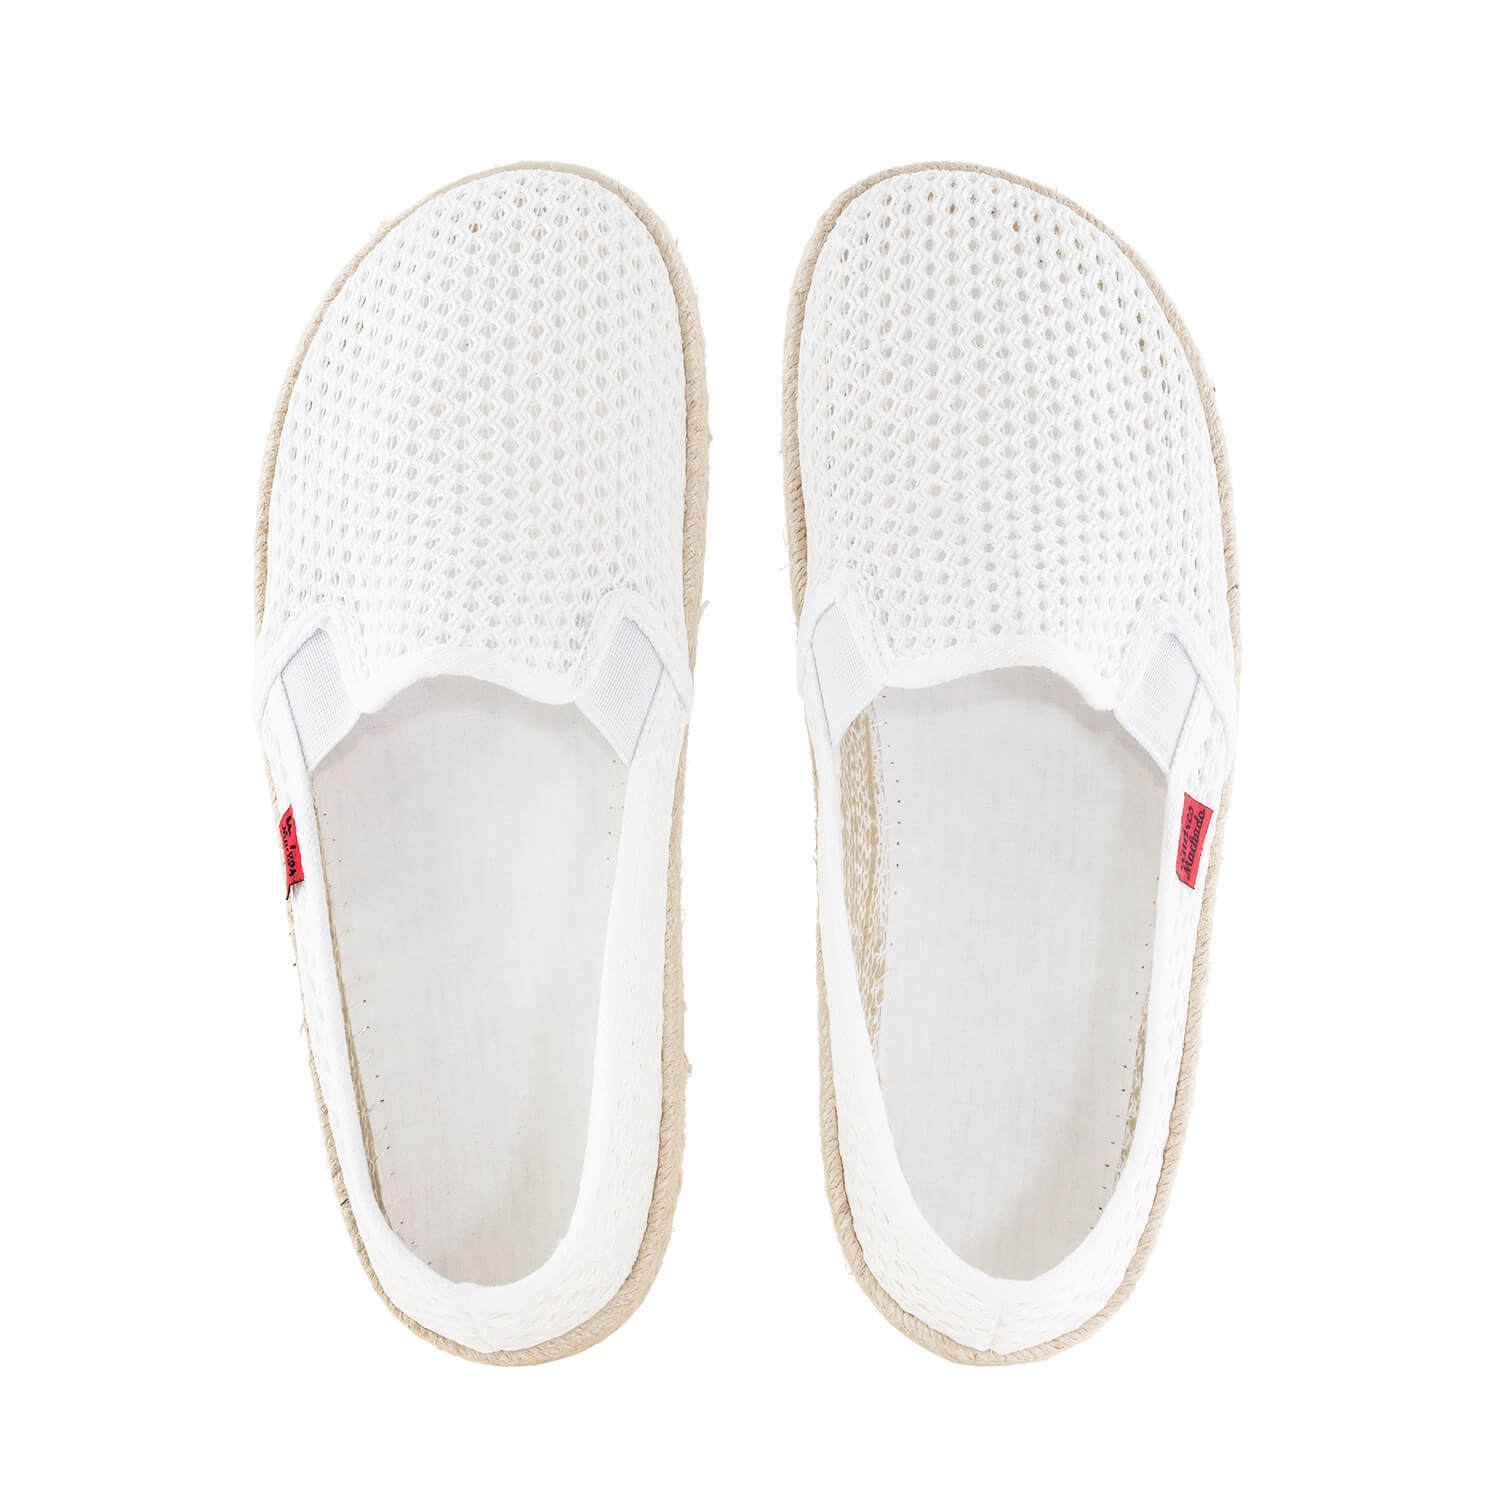 Mythical White Mesh Slip-On Shoes with Rubber and Jute Sole 